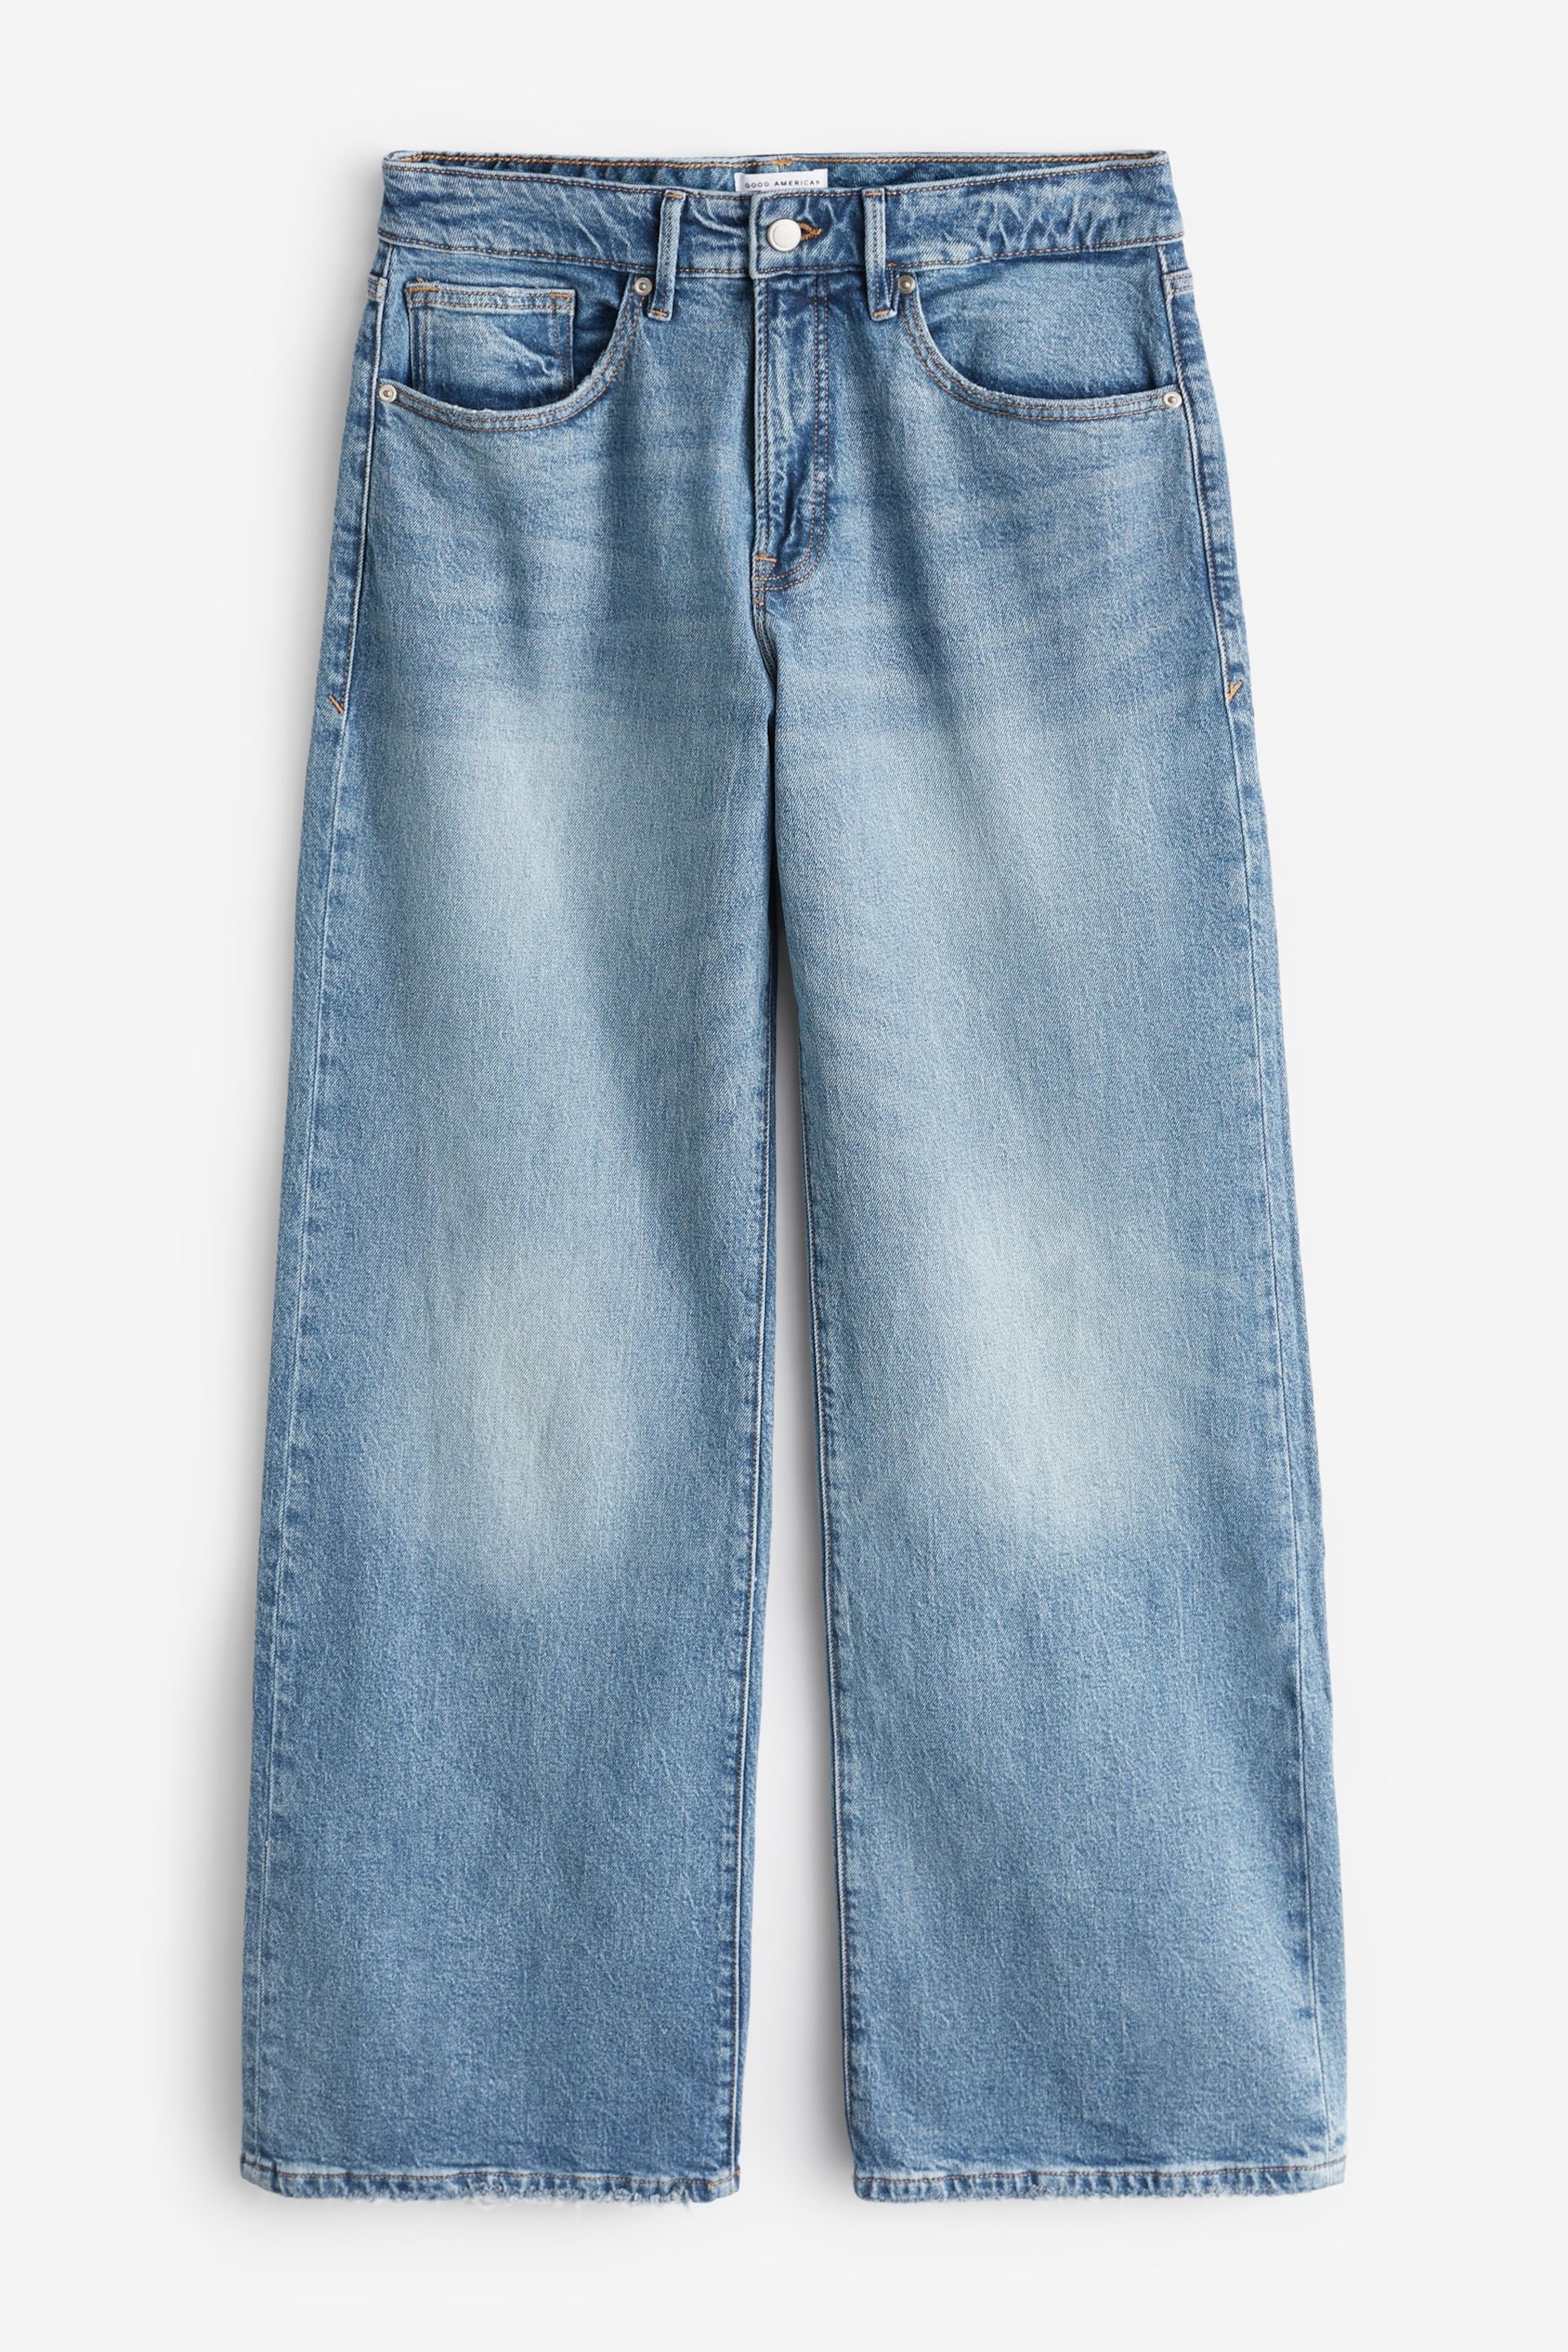 Good American Blue Good Ease Wide Leg Jeans - Image 7 of 7